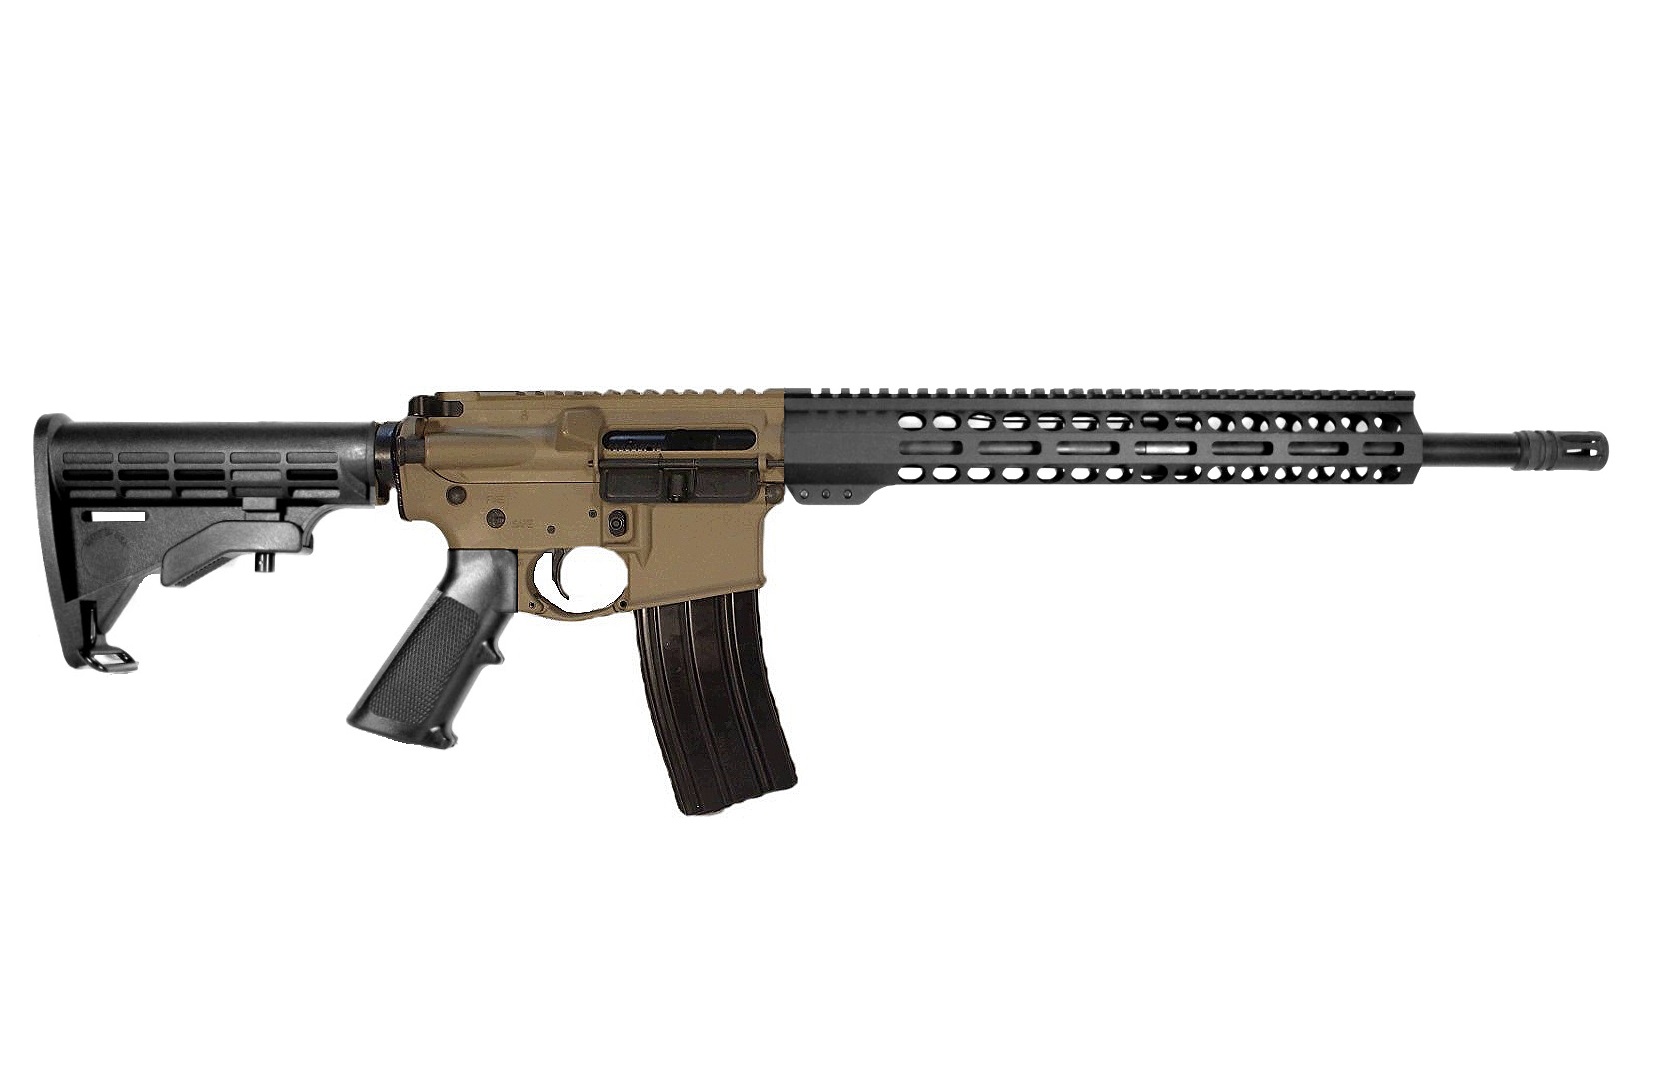 16 inch 50 Beowulf AR15 Rifle FDE/BLK Color 